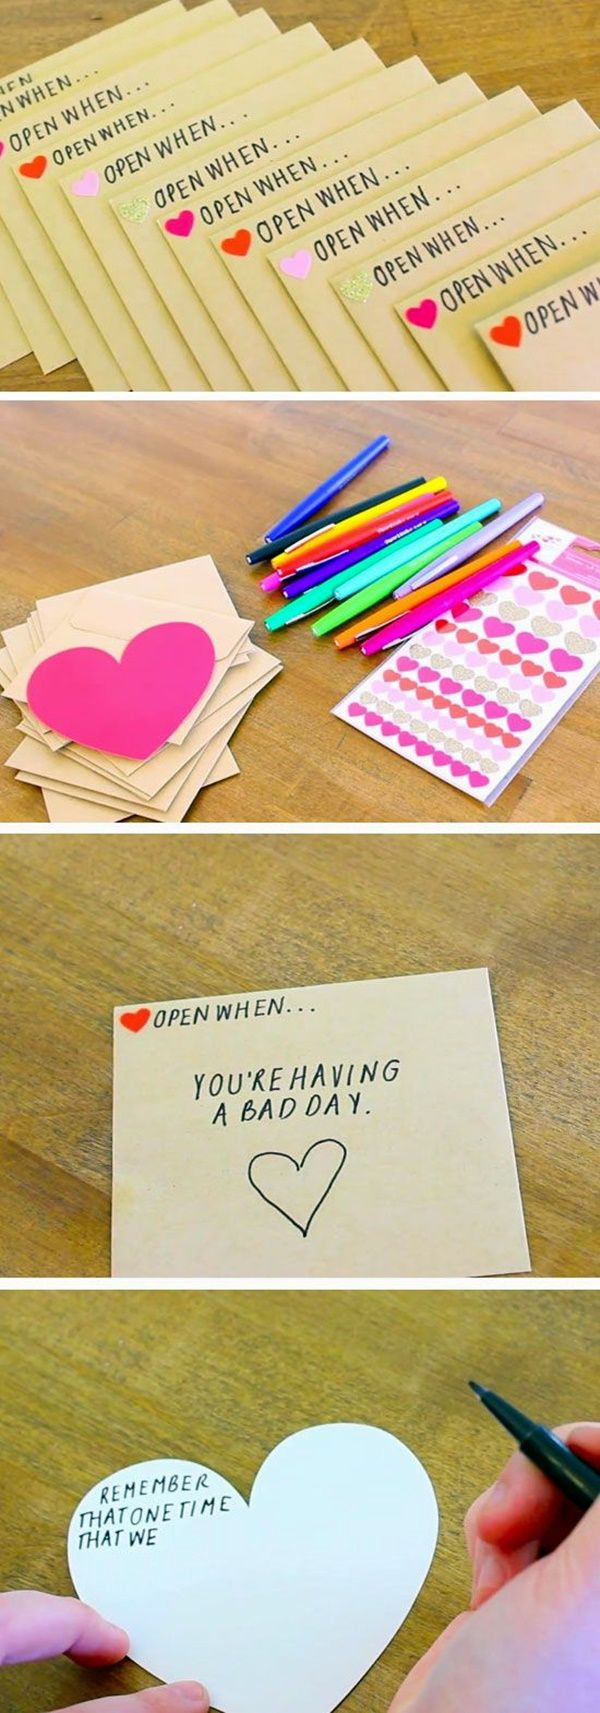 Homemade Birthday Gift Ideas For Boyfriend
 101 Homemade Valentines Day Ideas for Him that re really